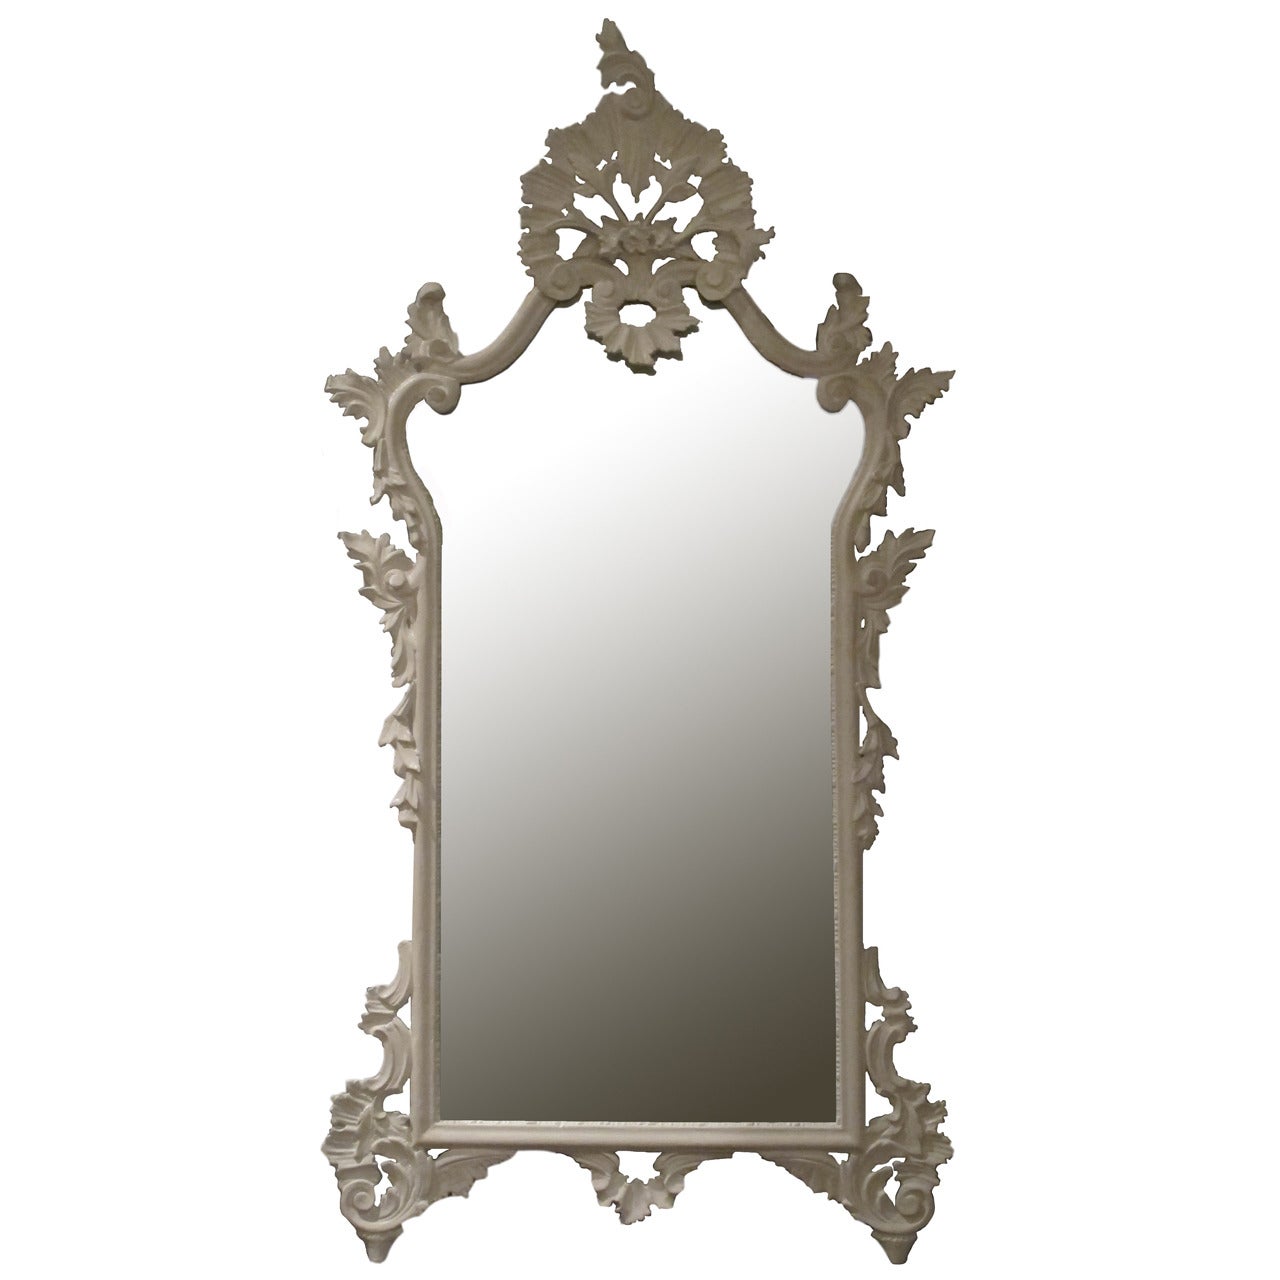 Late 19th Century English Mirror in the Rococo Style